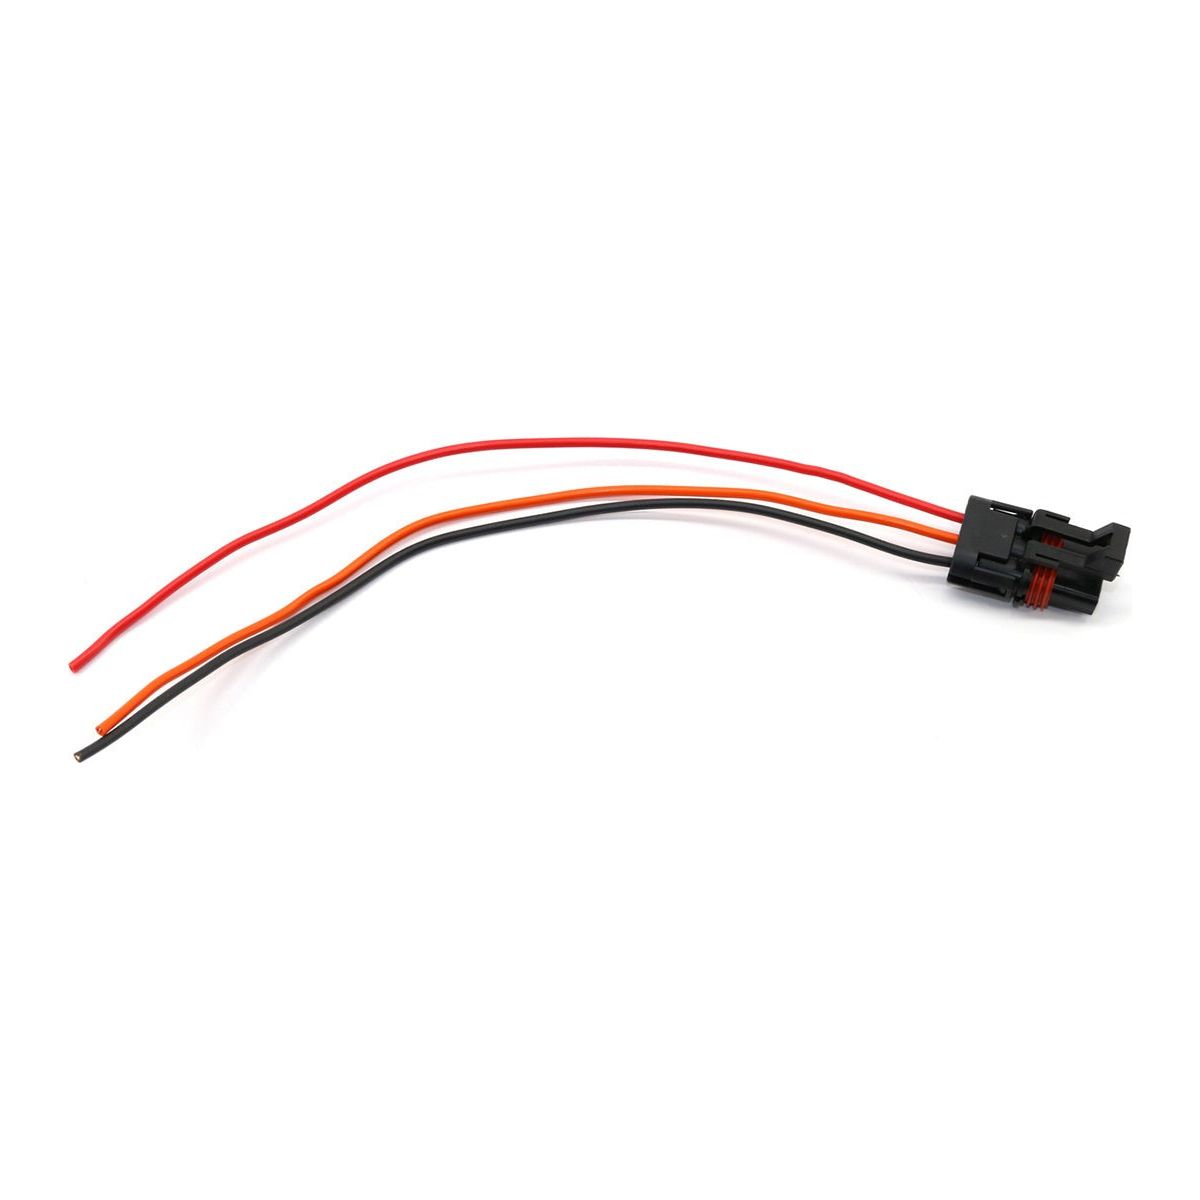 Polaris Pulse Busbar Accessory Wiring Harness with 14 Gauge 12v/IGN/GND Wires | XTC Power Products